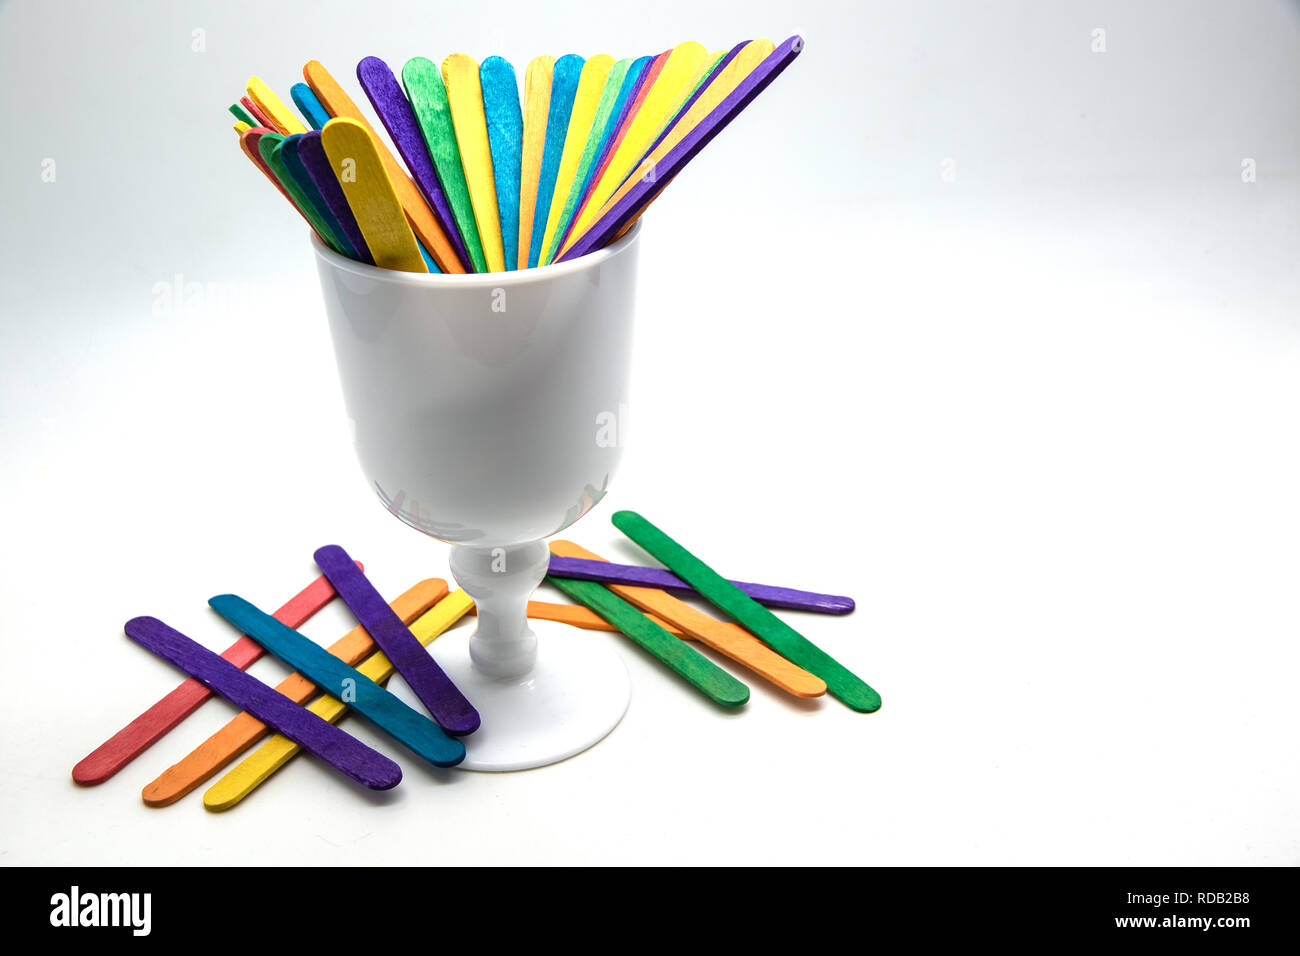 Colorful Scattered Wooden Multicolored Popsicle Sticks Stock Photo -  Download Image Now - iStock